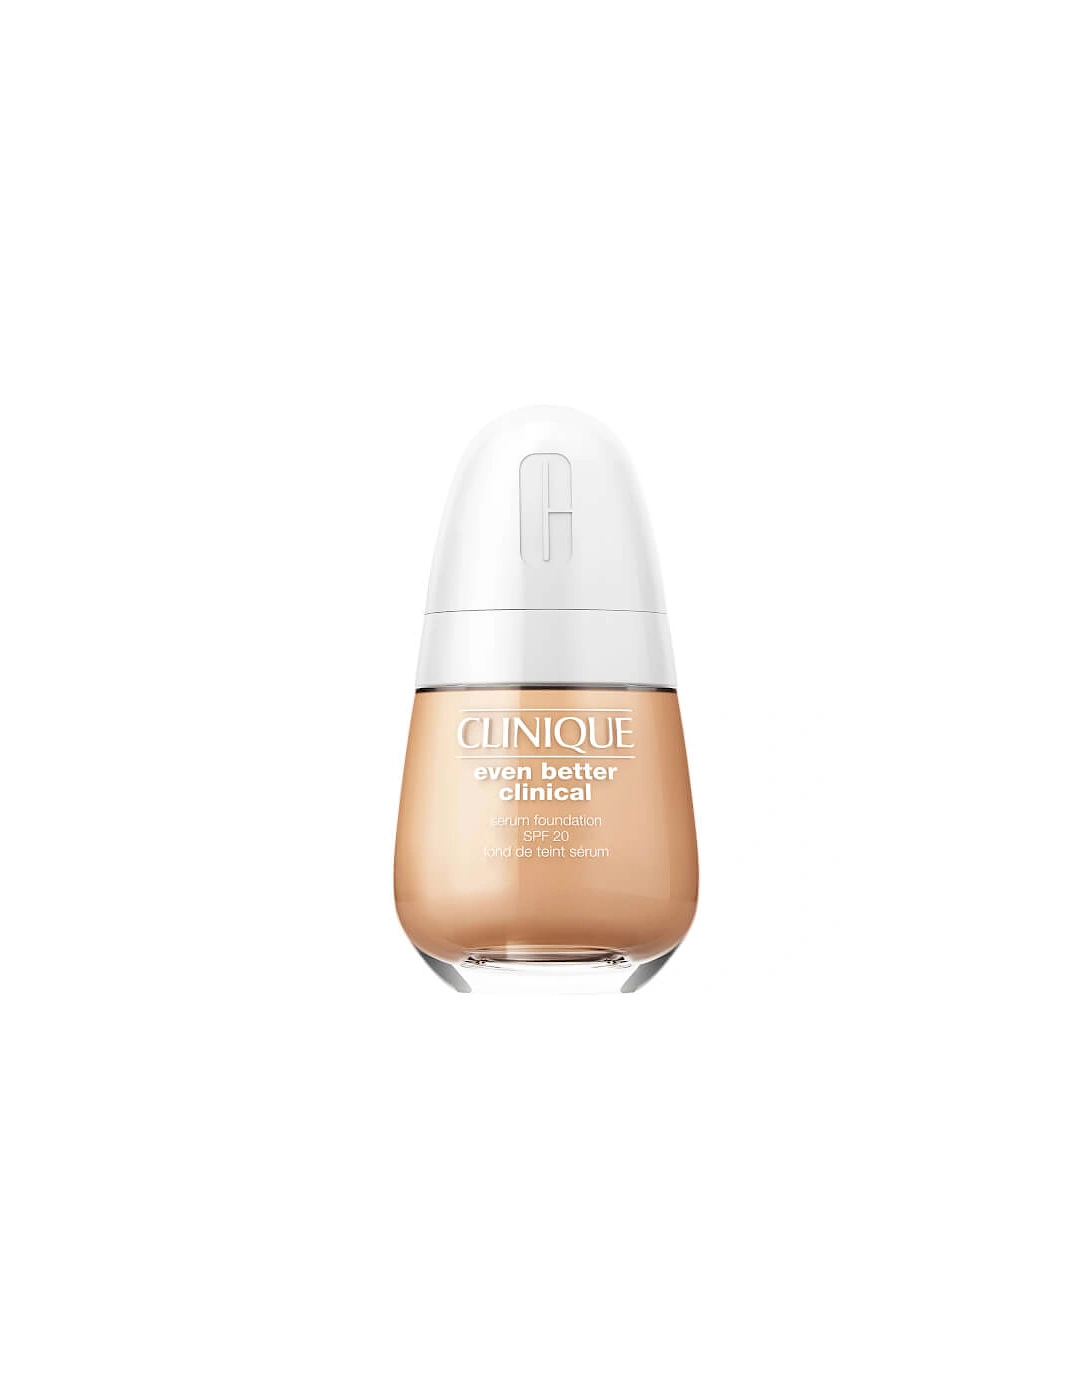 Even Better Clinical Serum Foundation SPF20 - Biscuit - Clinique, 2 of 1